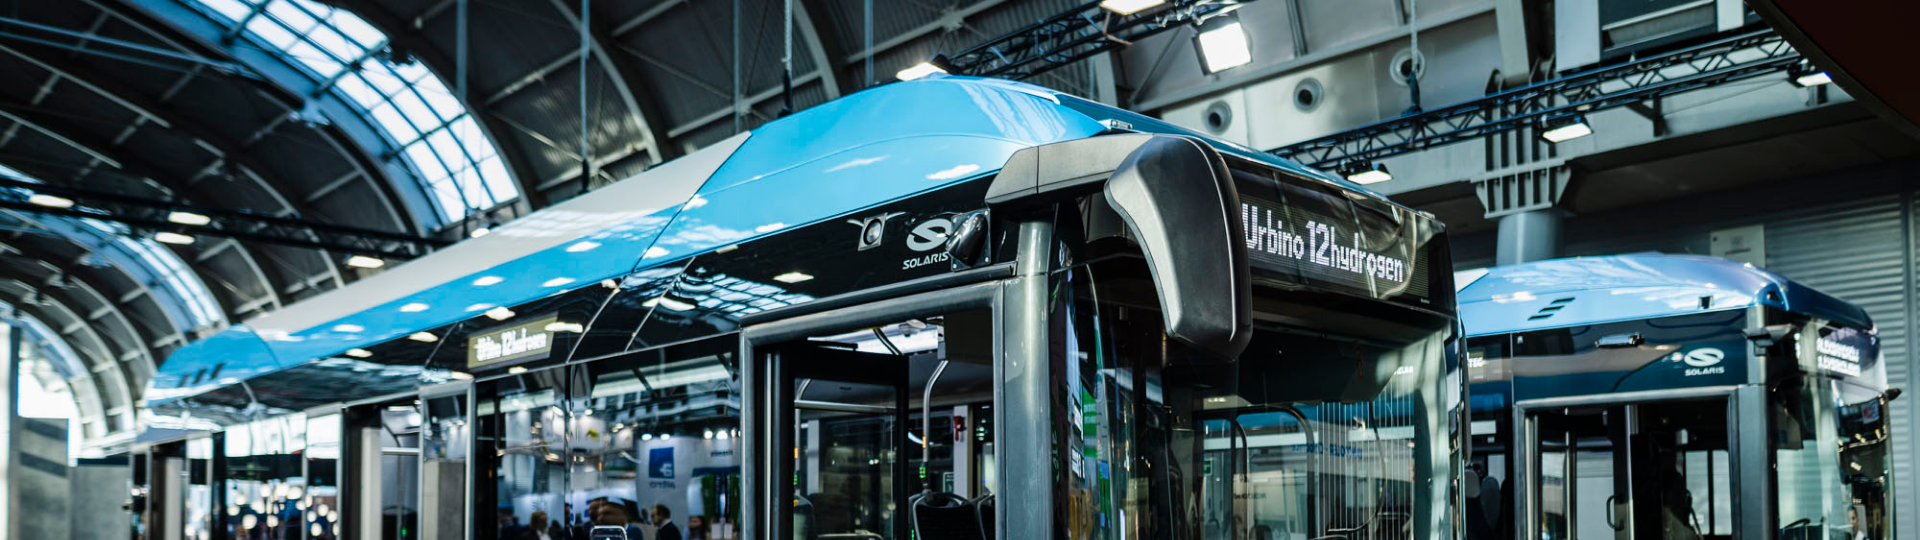 10 Solaris hydrogen buses to go to Upper Bavaria